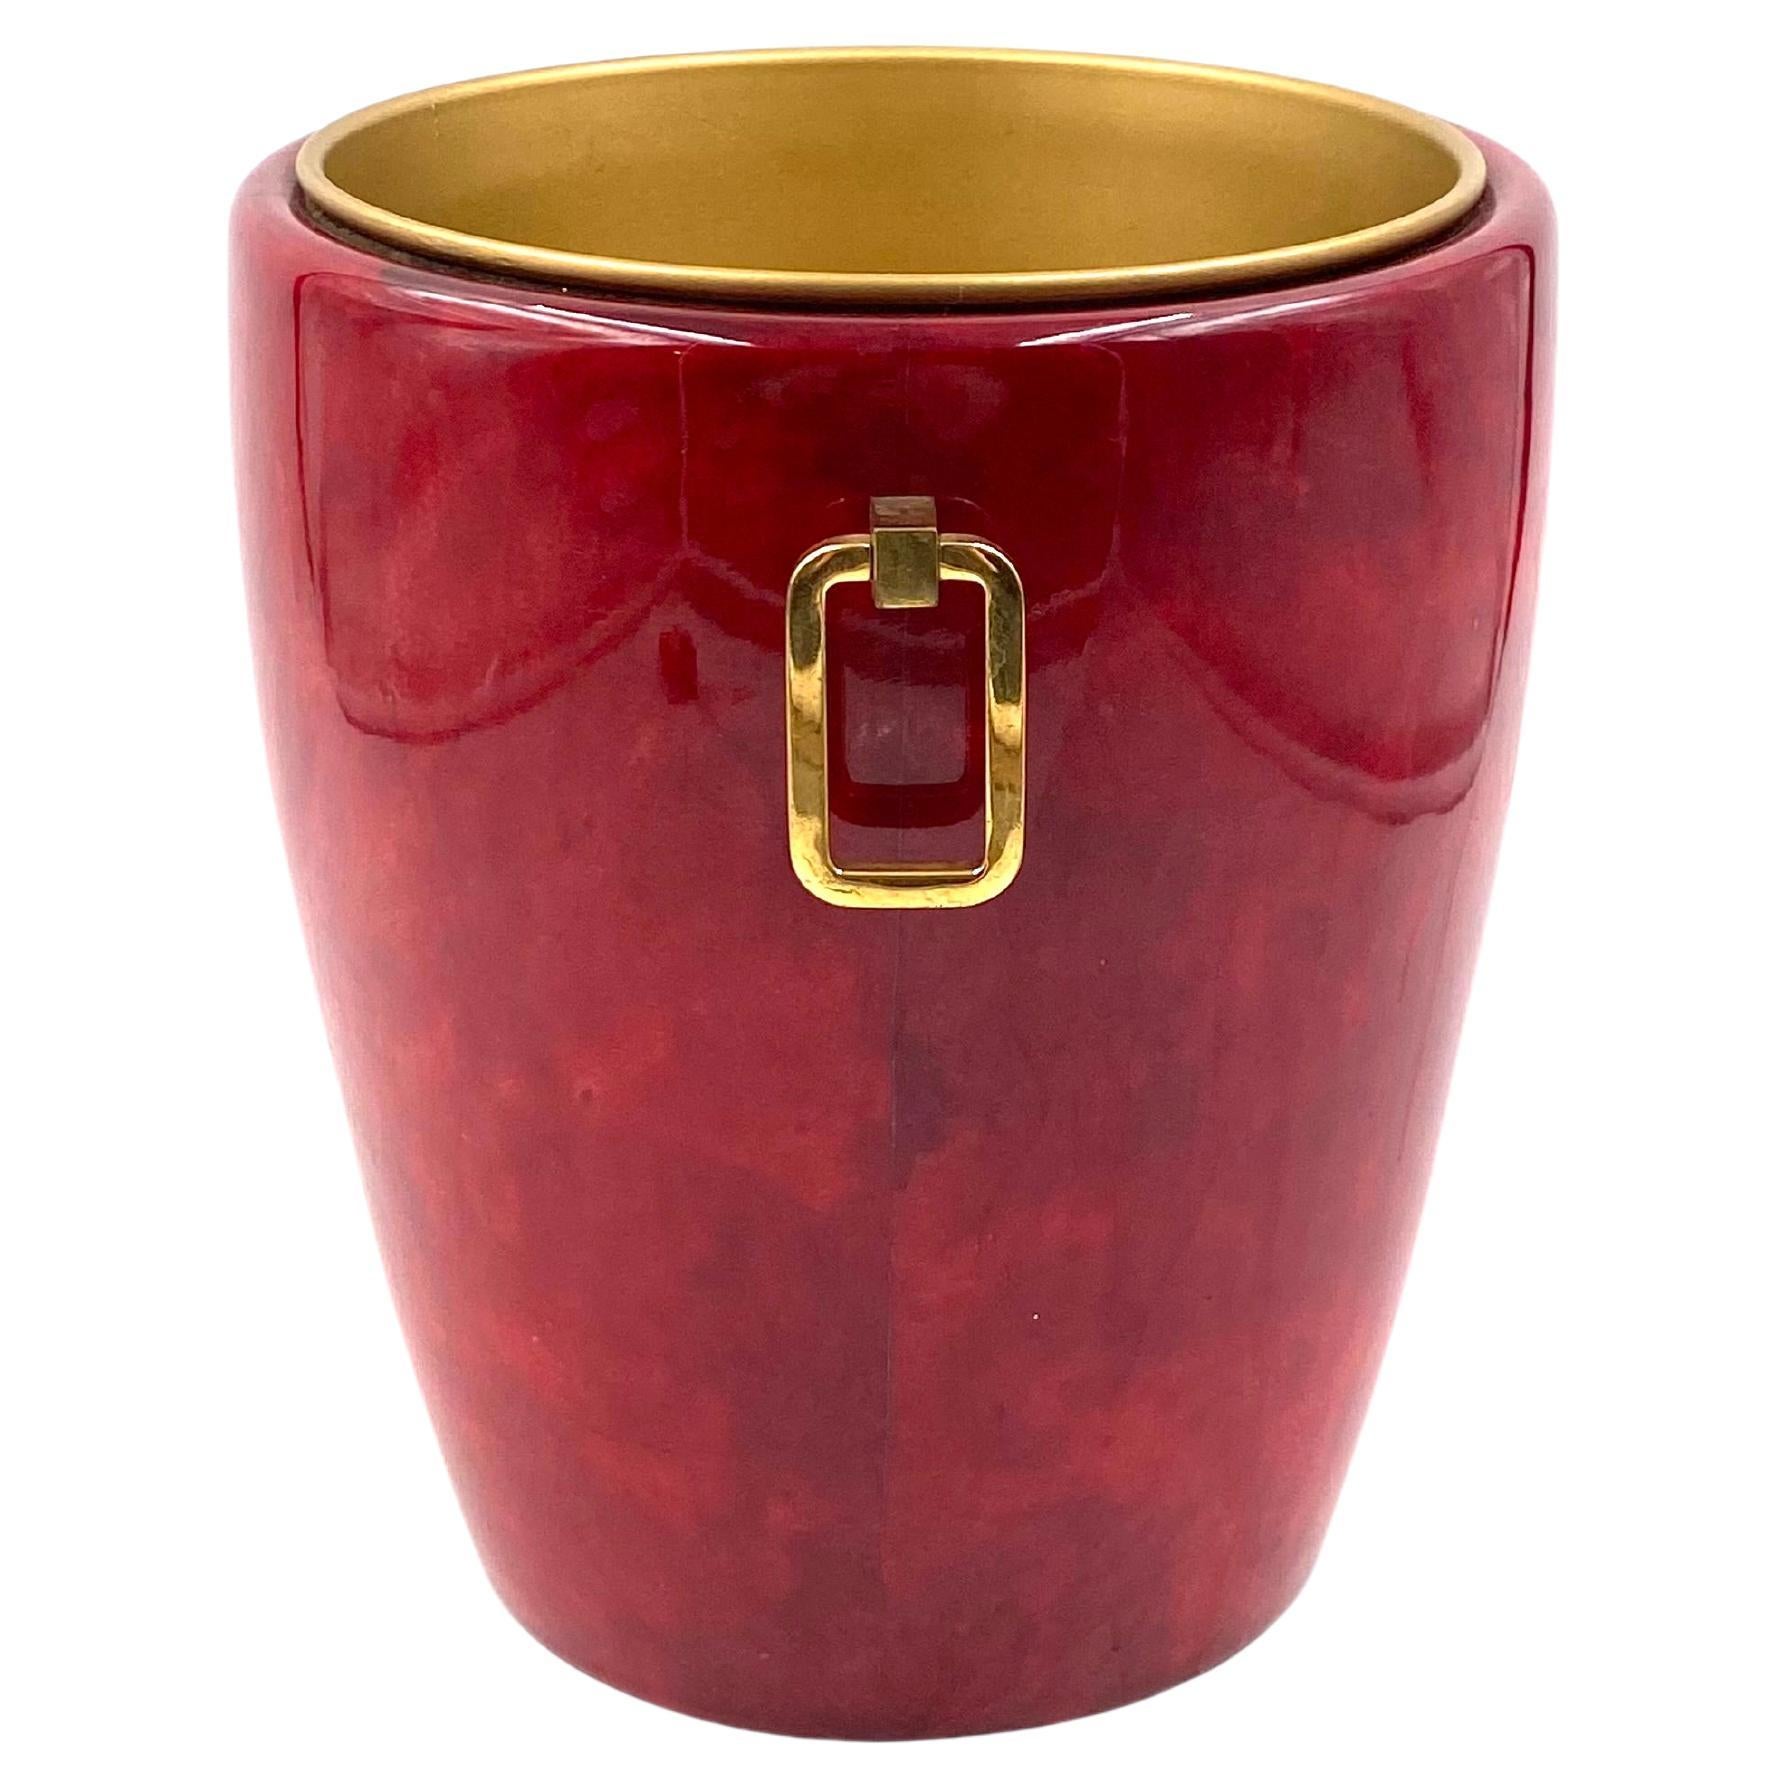 Aldo Tura, Brass and red Parchment cooler / Ice bucket, Italy, 1960s